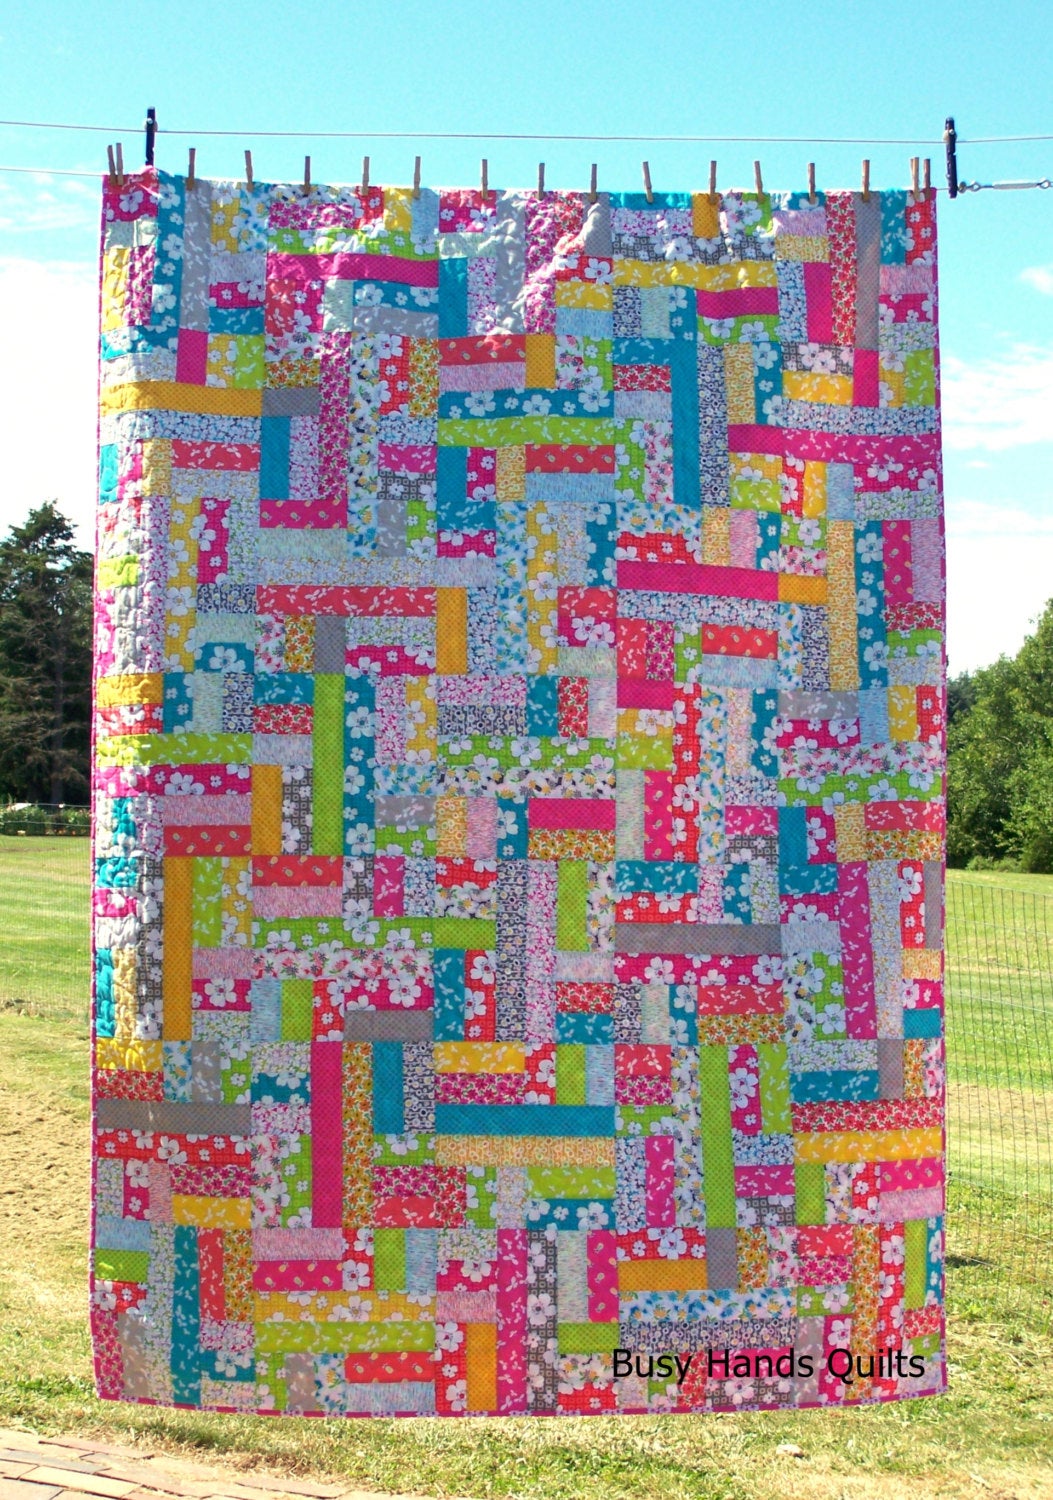 Scrappy Patches Quilt Pattern PDF DOWNLOAD Busy Hands Quilts $12.99